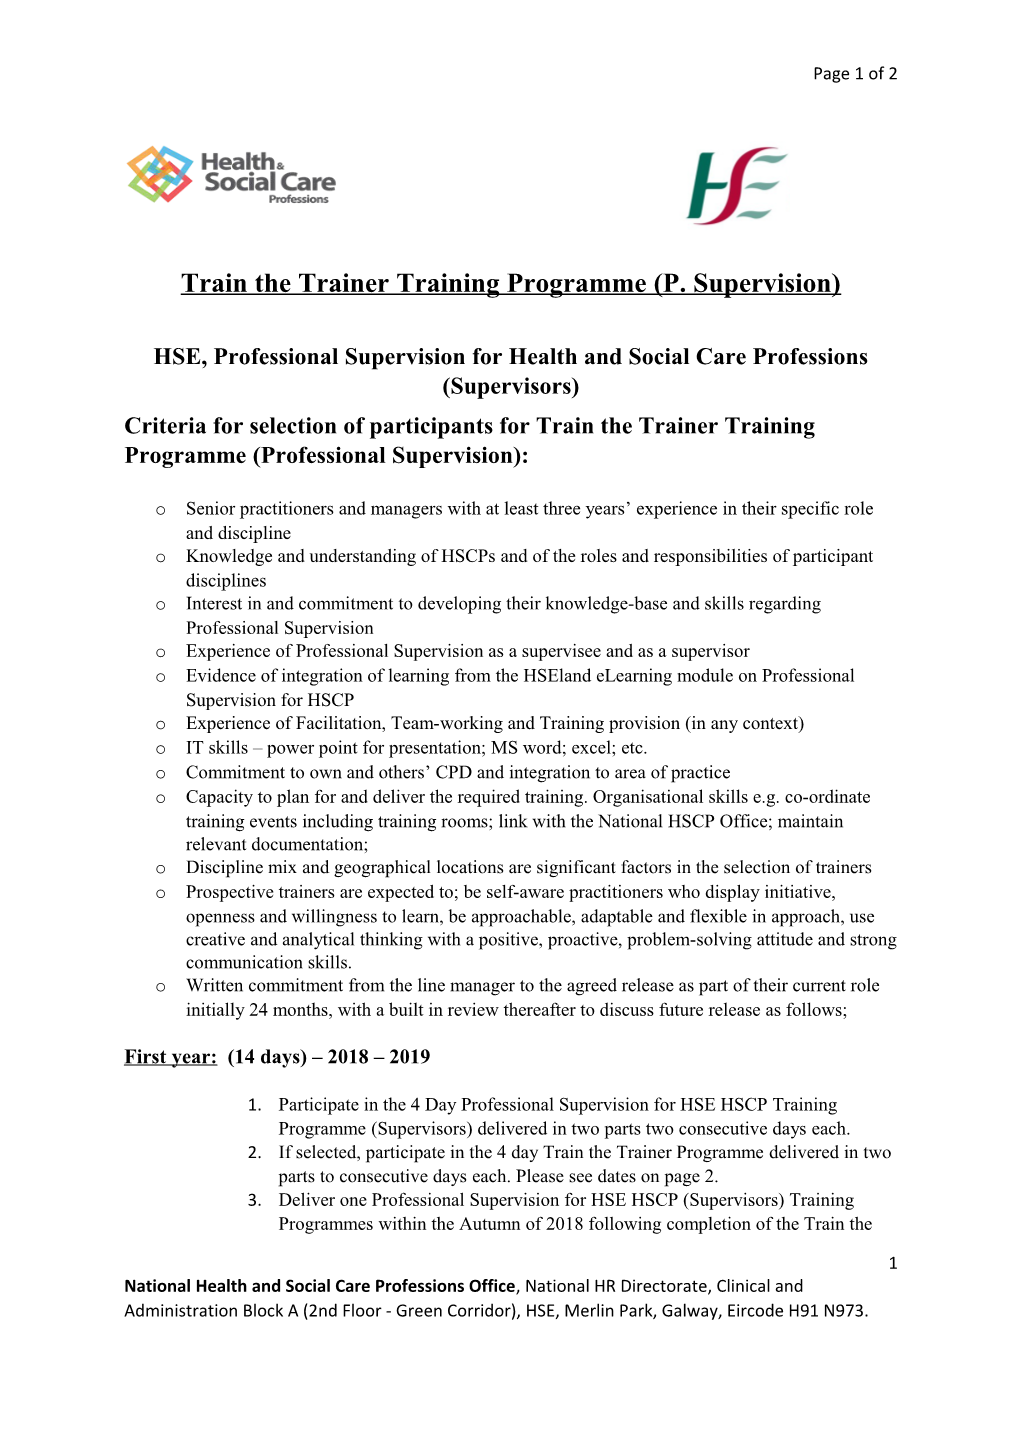 Train the Trainer Training Programme (P. Supervision)